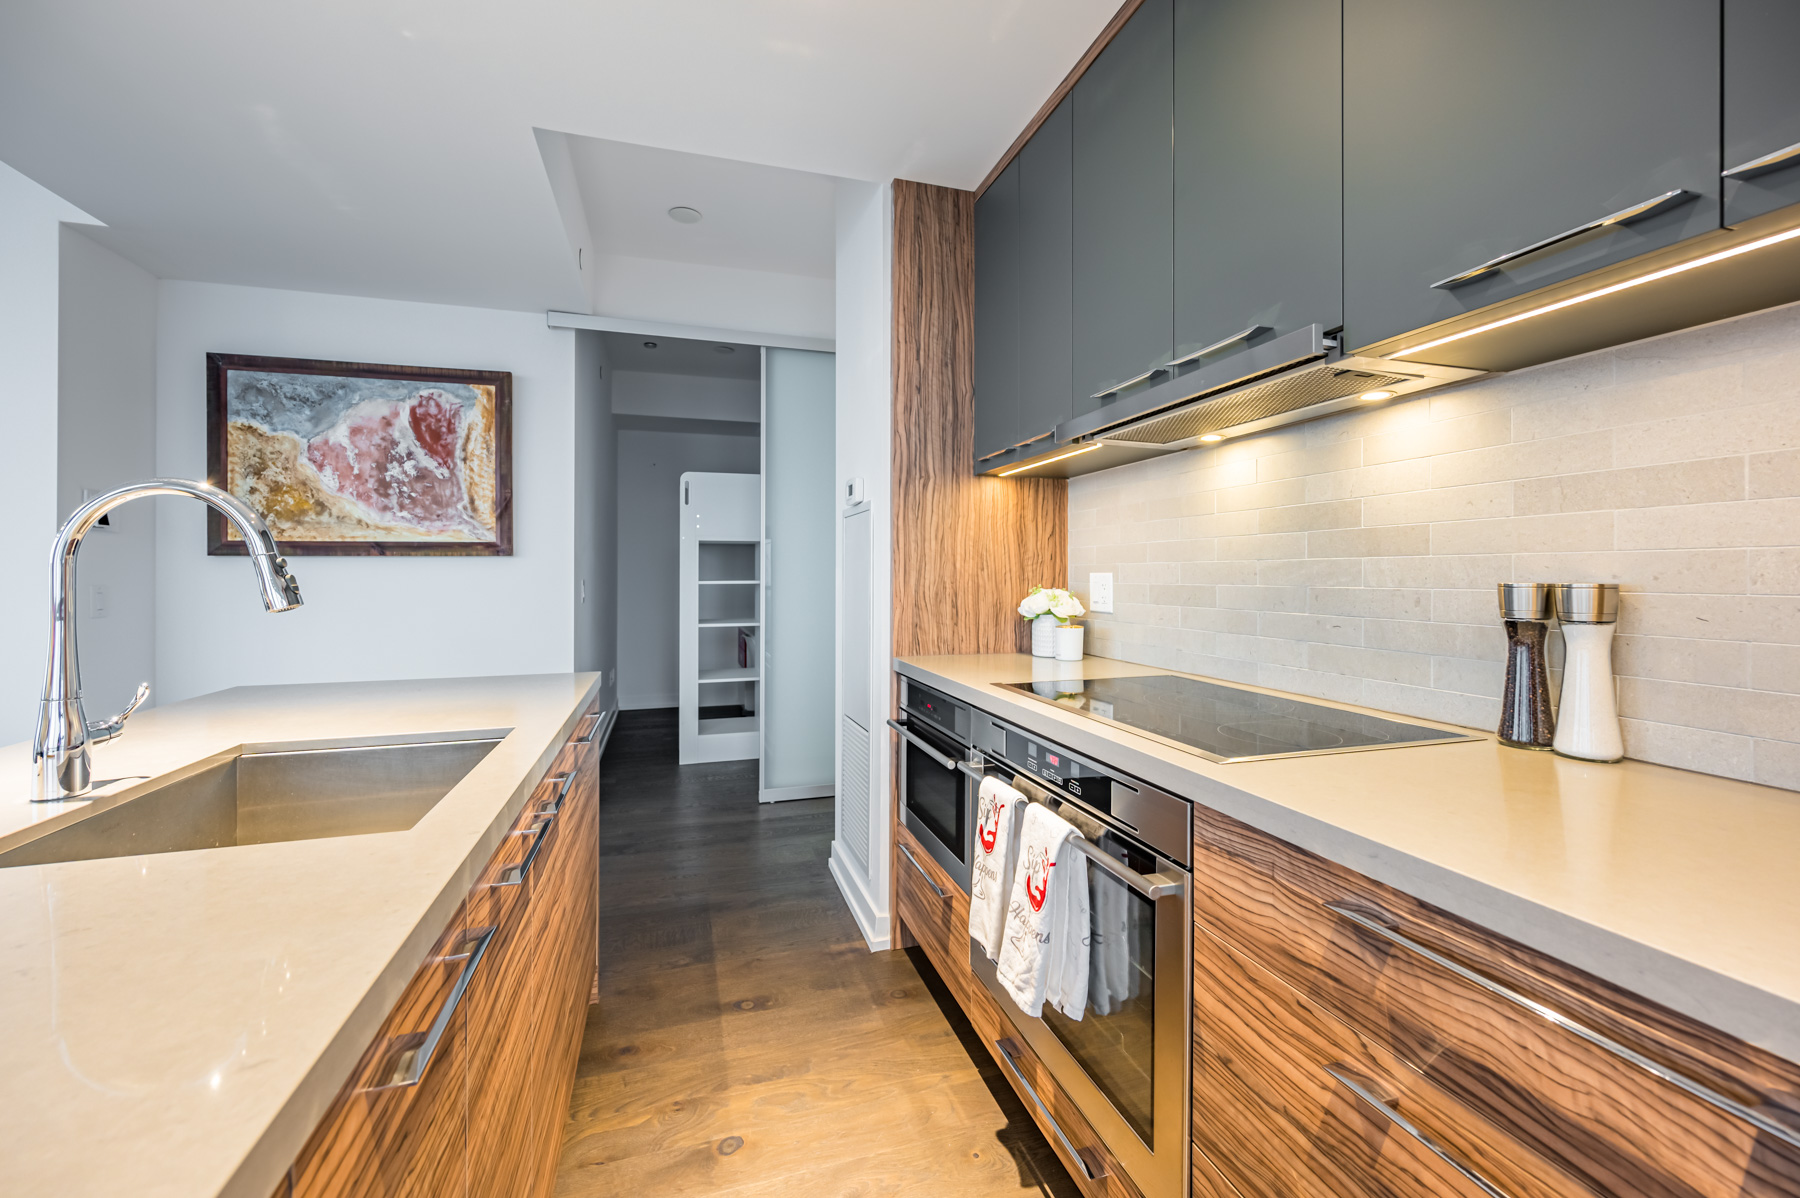 Condo kitchen with black cupboards, shiny cabinets, granite back-splash and marble counters